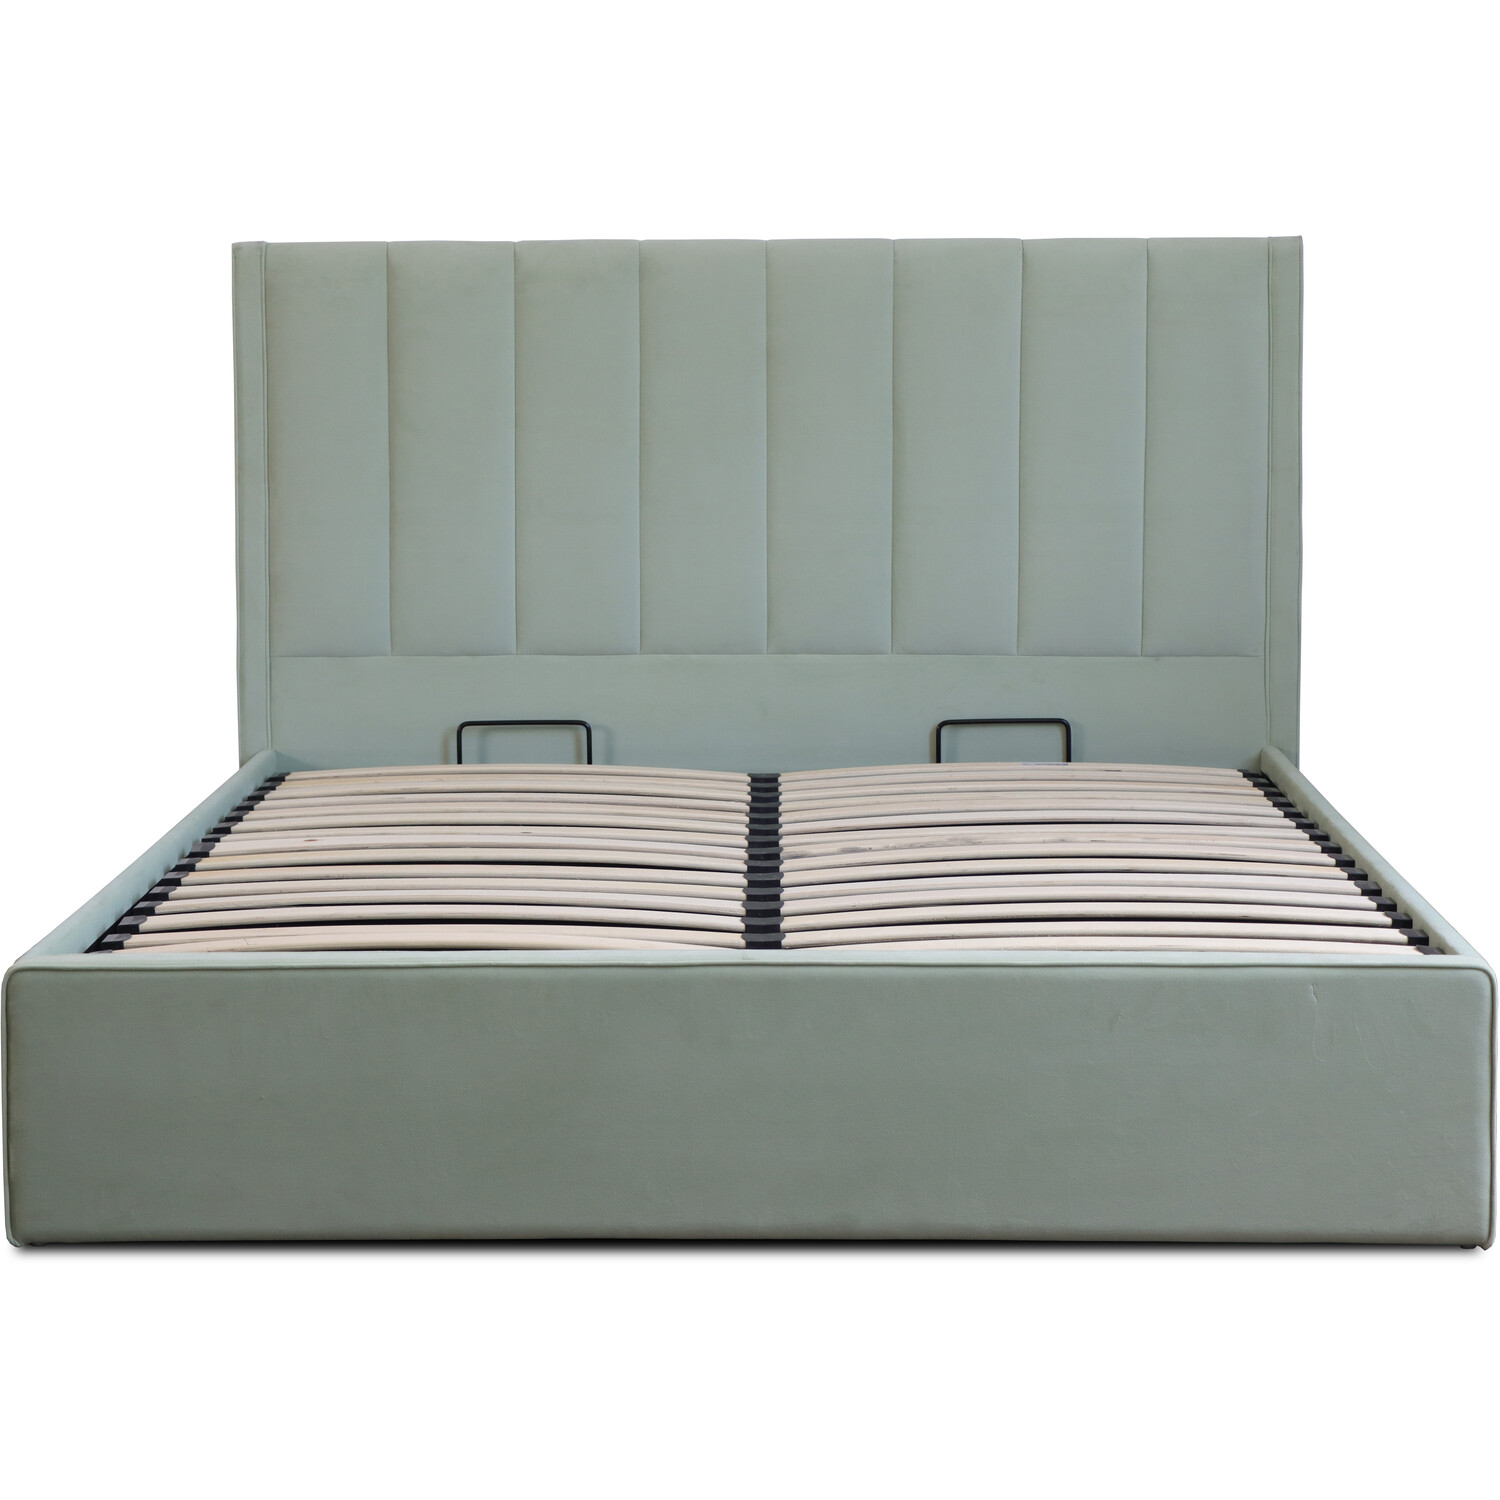 Willow Super King Size Mint Ottoman Bed Image 3